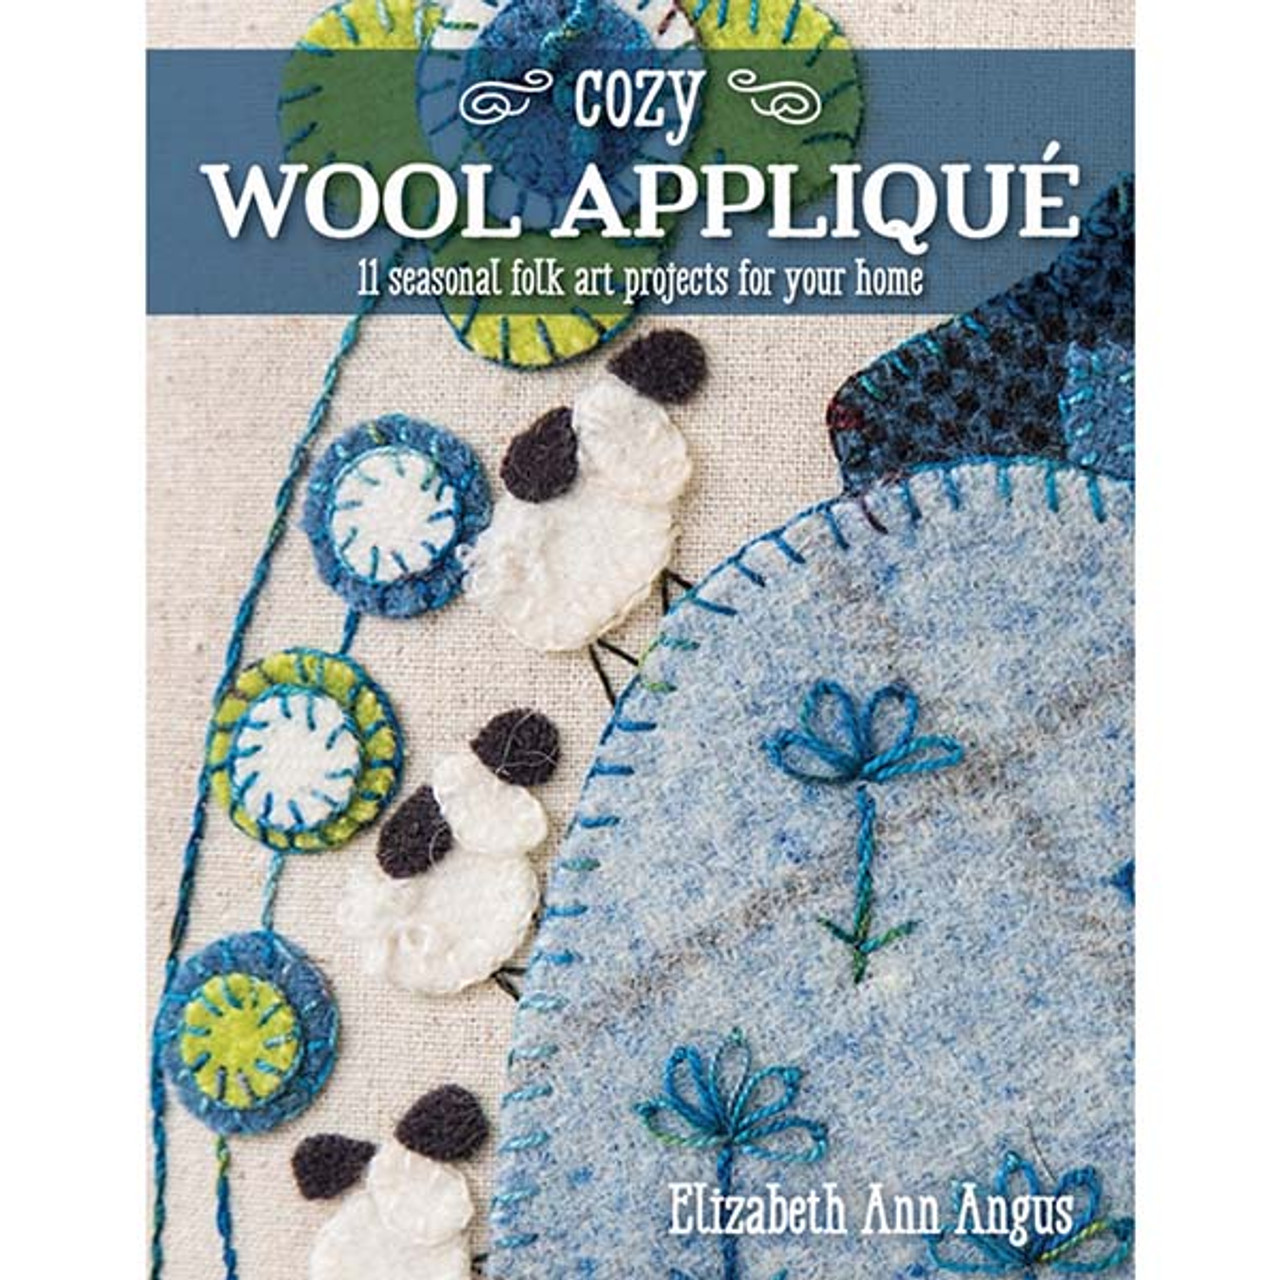 A New Dimension in Wool Applique